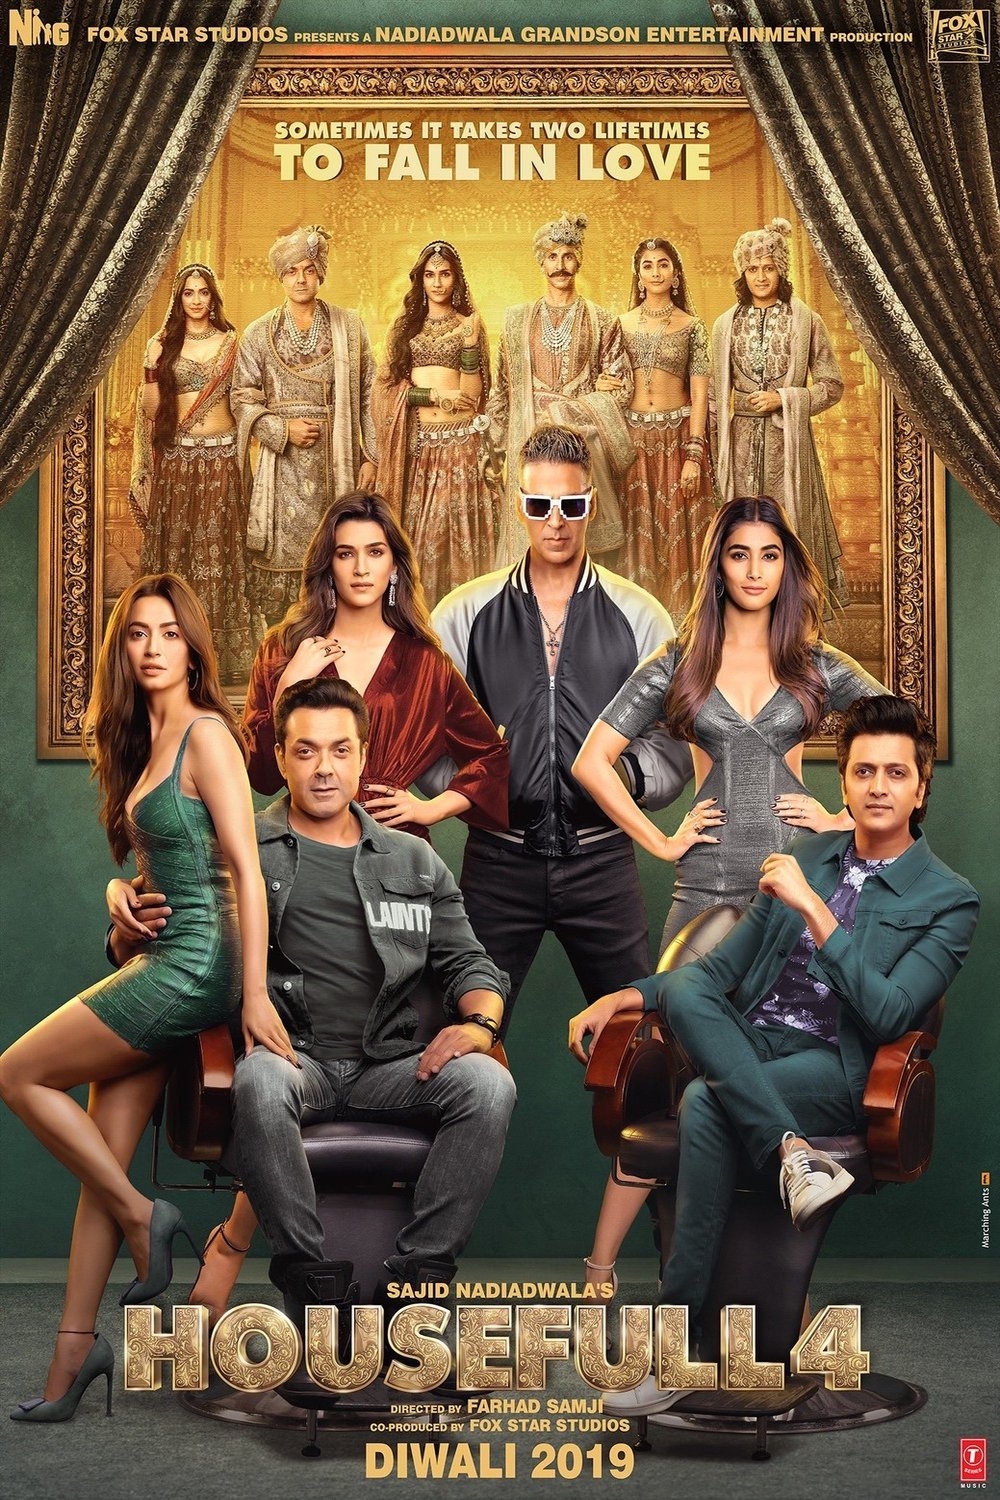 Hindi poster of the movie Housefull 4